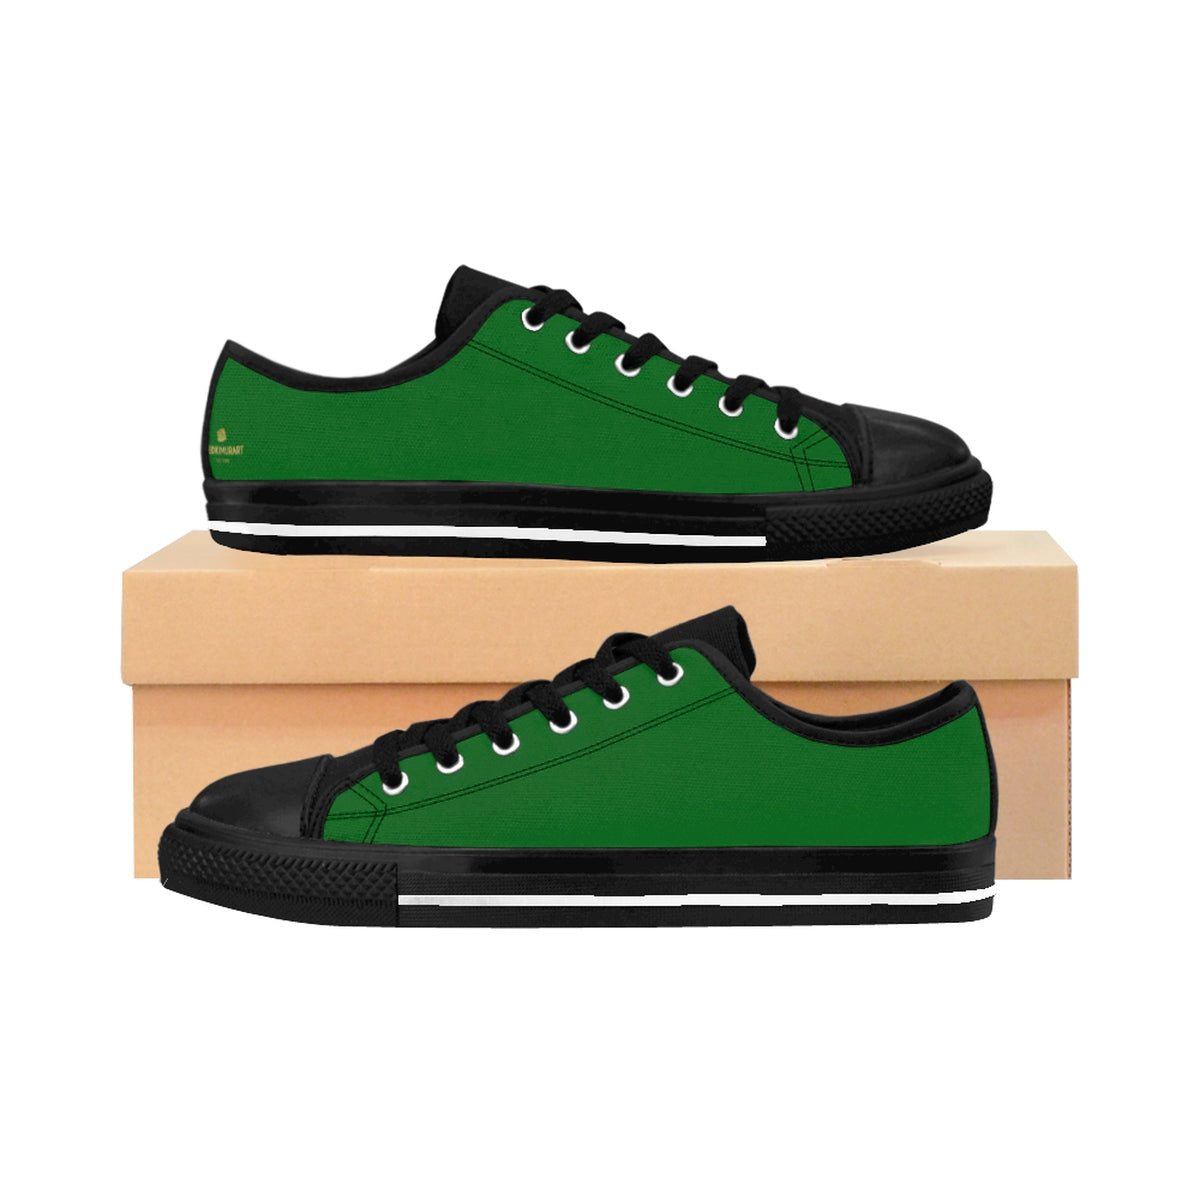 green color sneakers